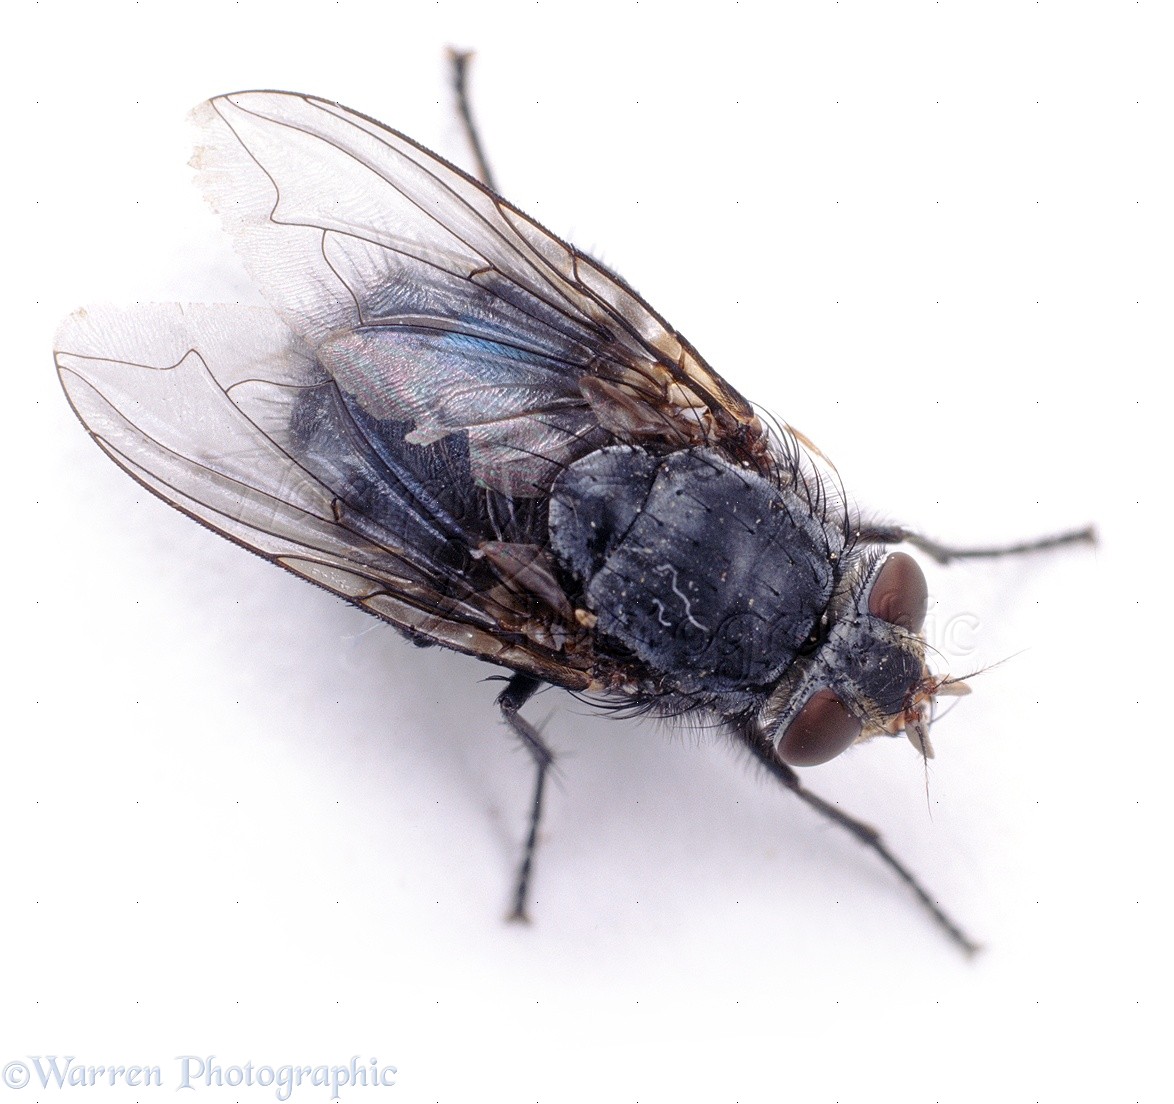 Download this Bluebottle Fly Calliphora Vomitoria picture